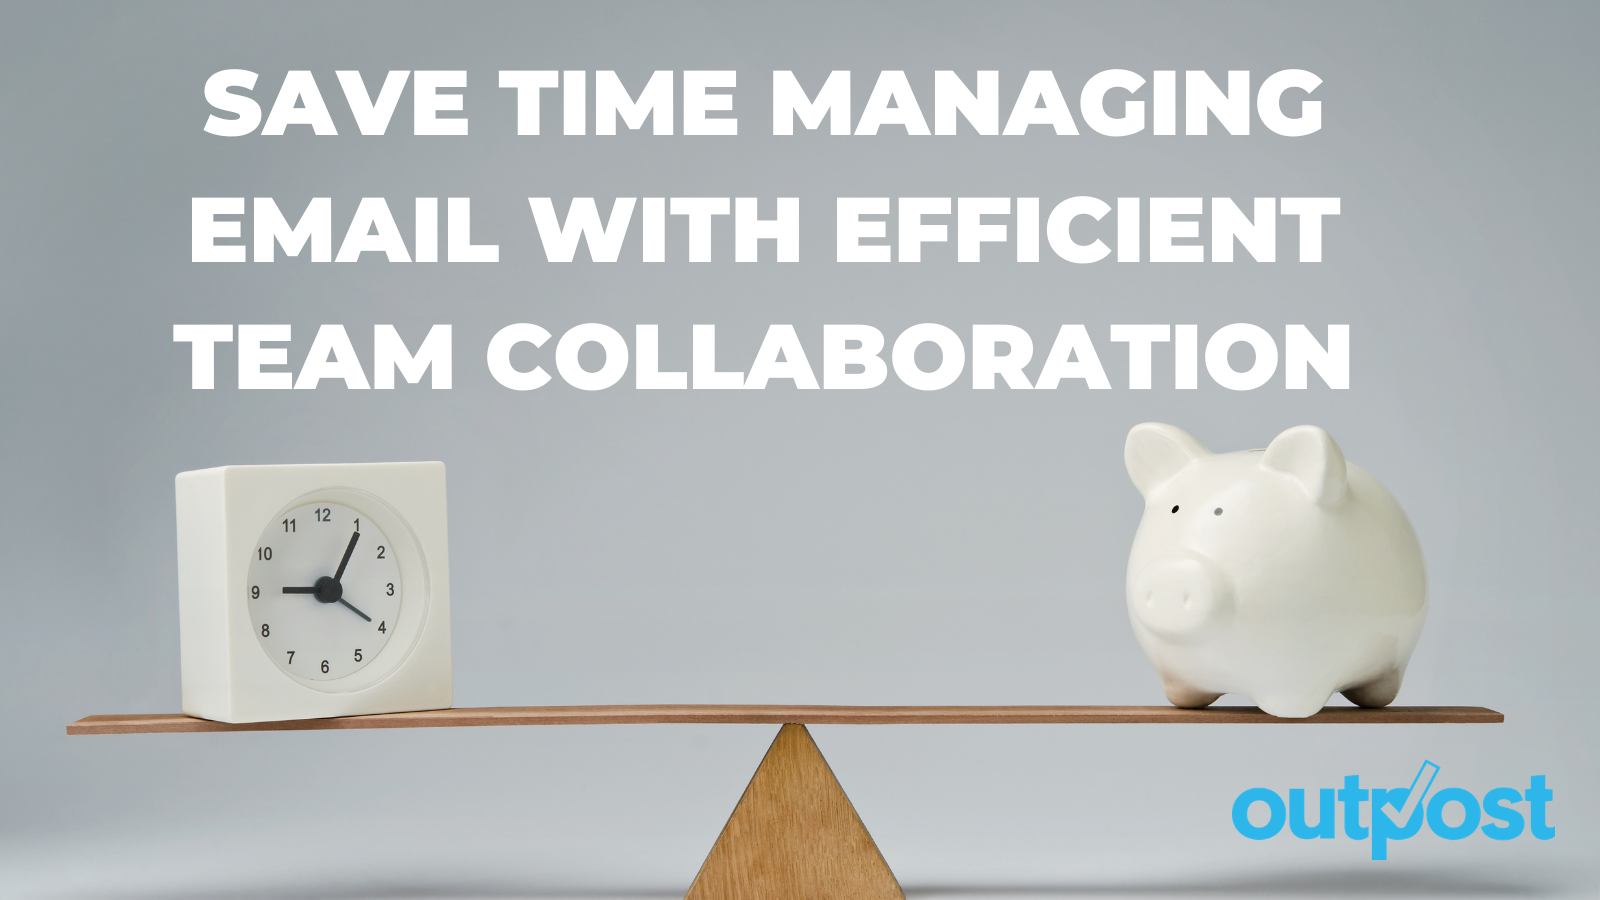 Save time managing email with efficient team collaboration (and the right tool!)